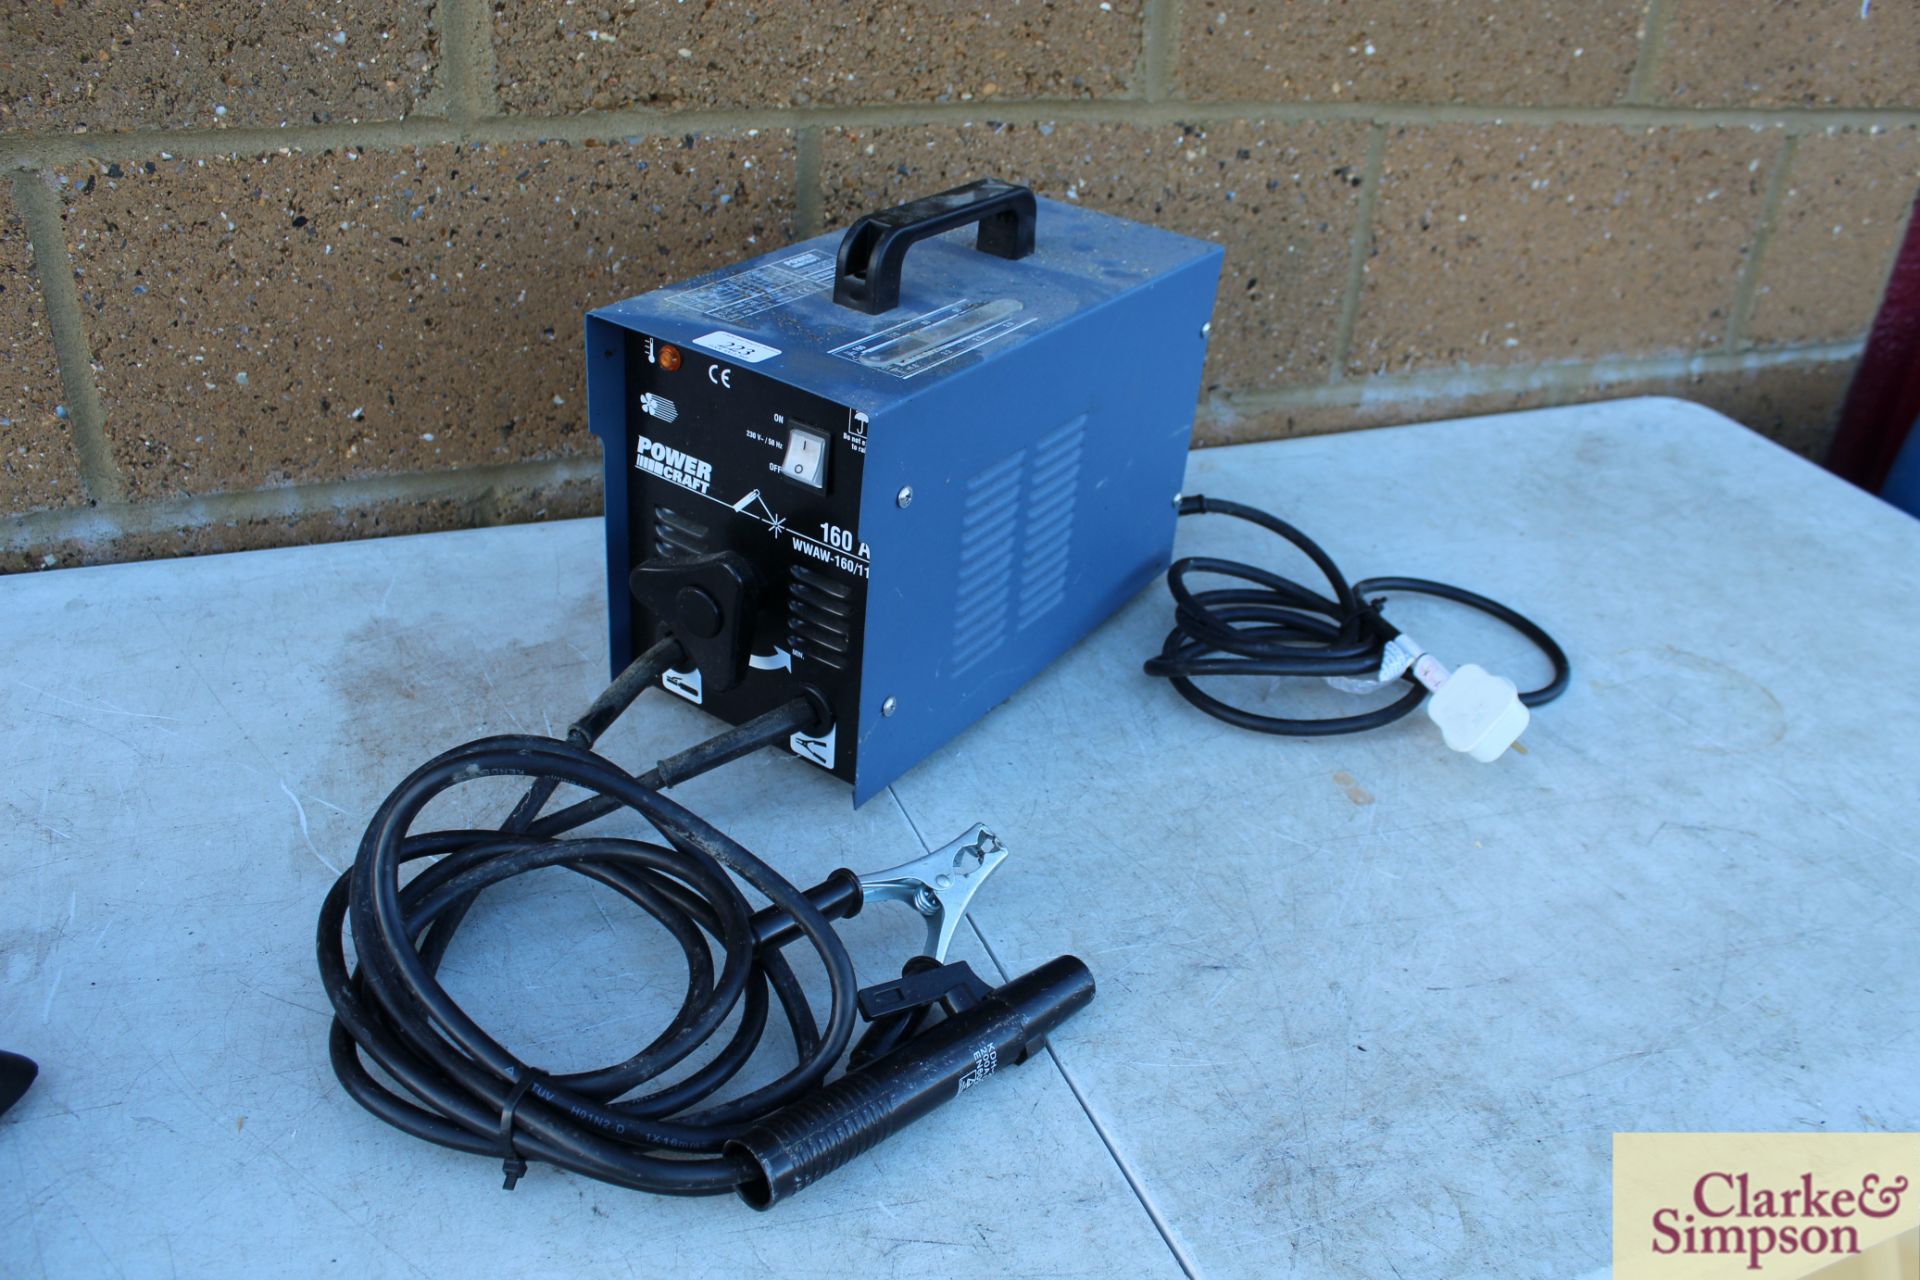 Powercraft WWAW-160/11 160A arc welder with mask. - Image 2 of 6